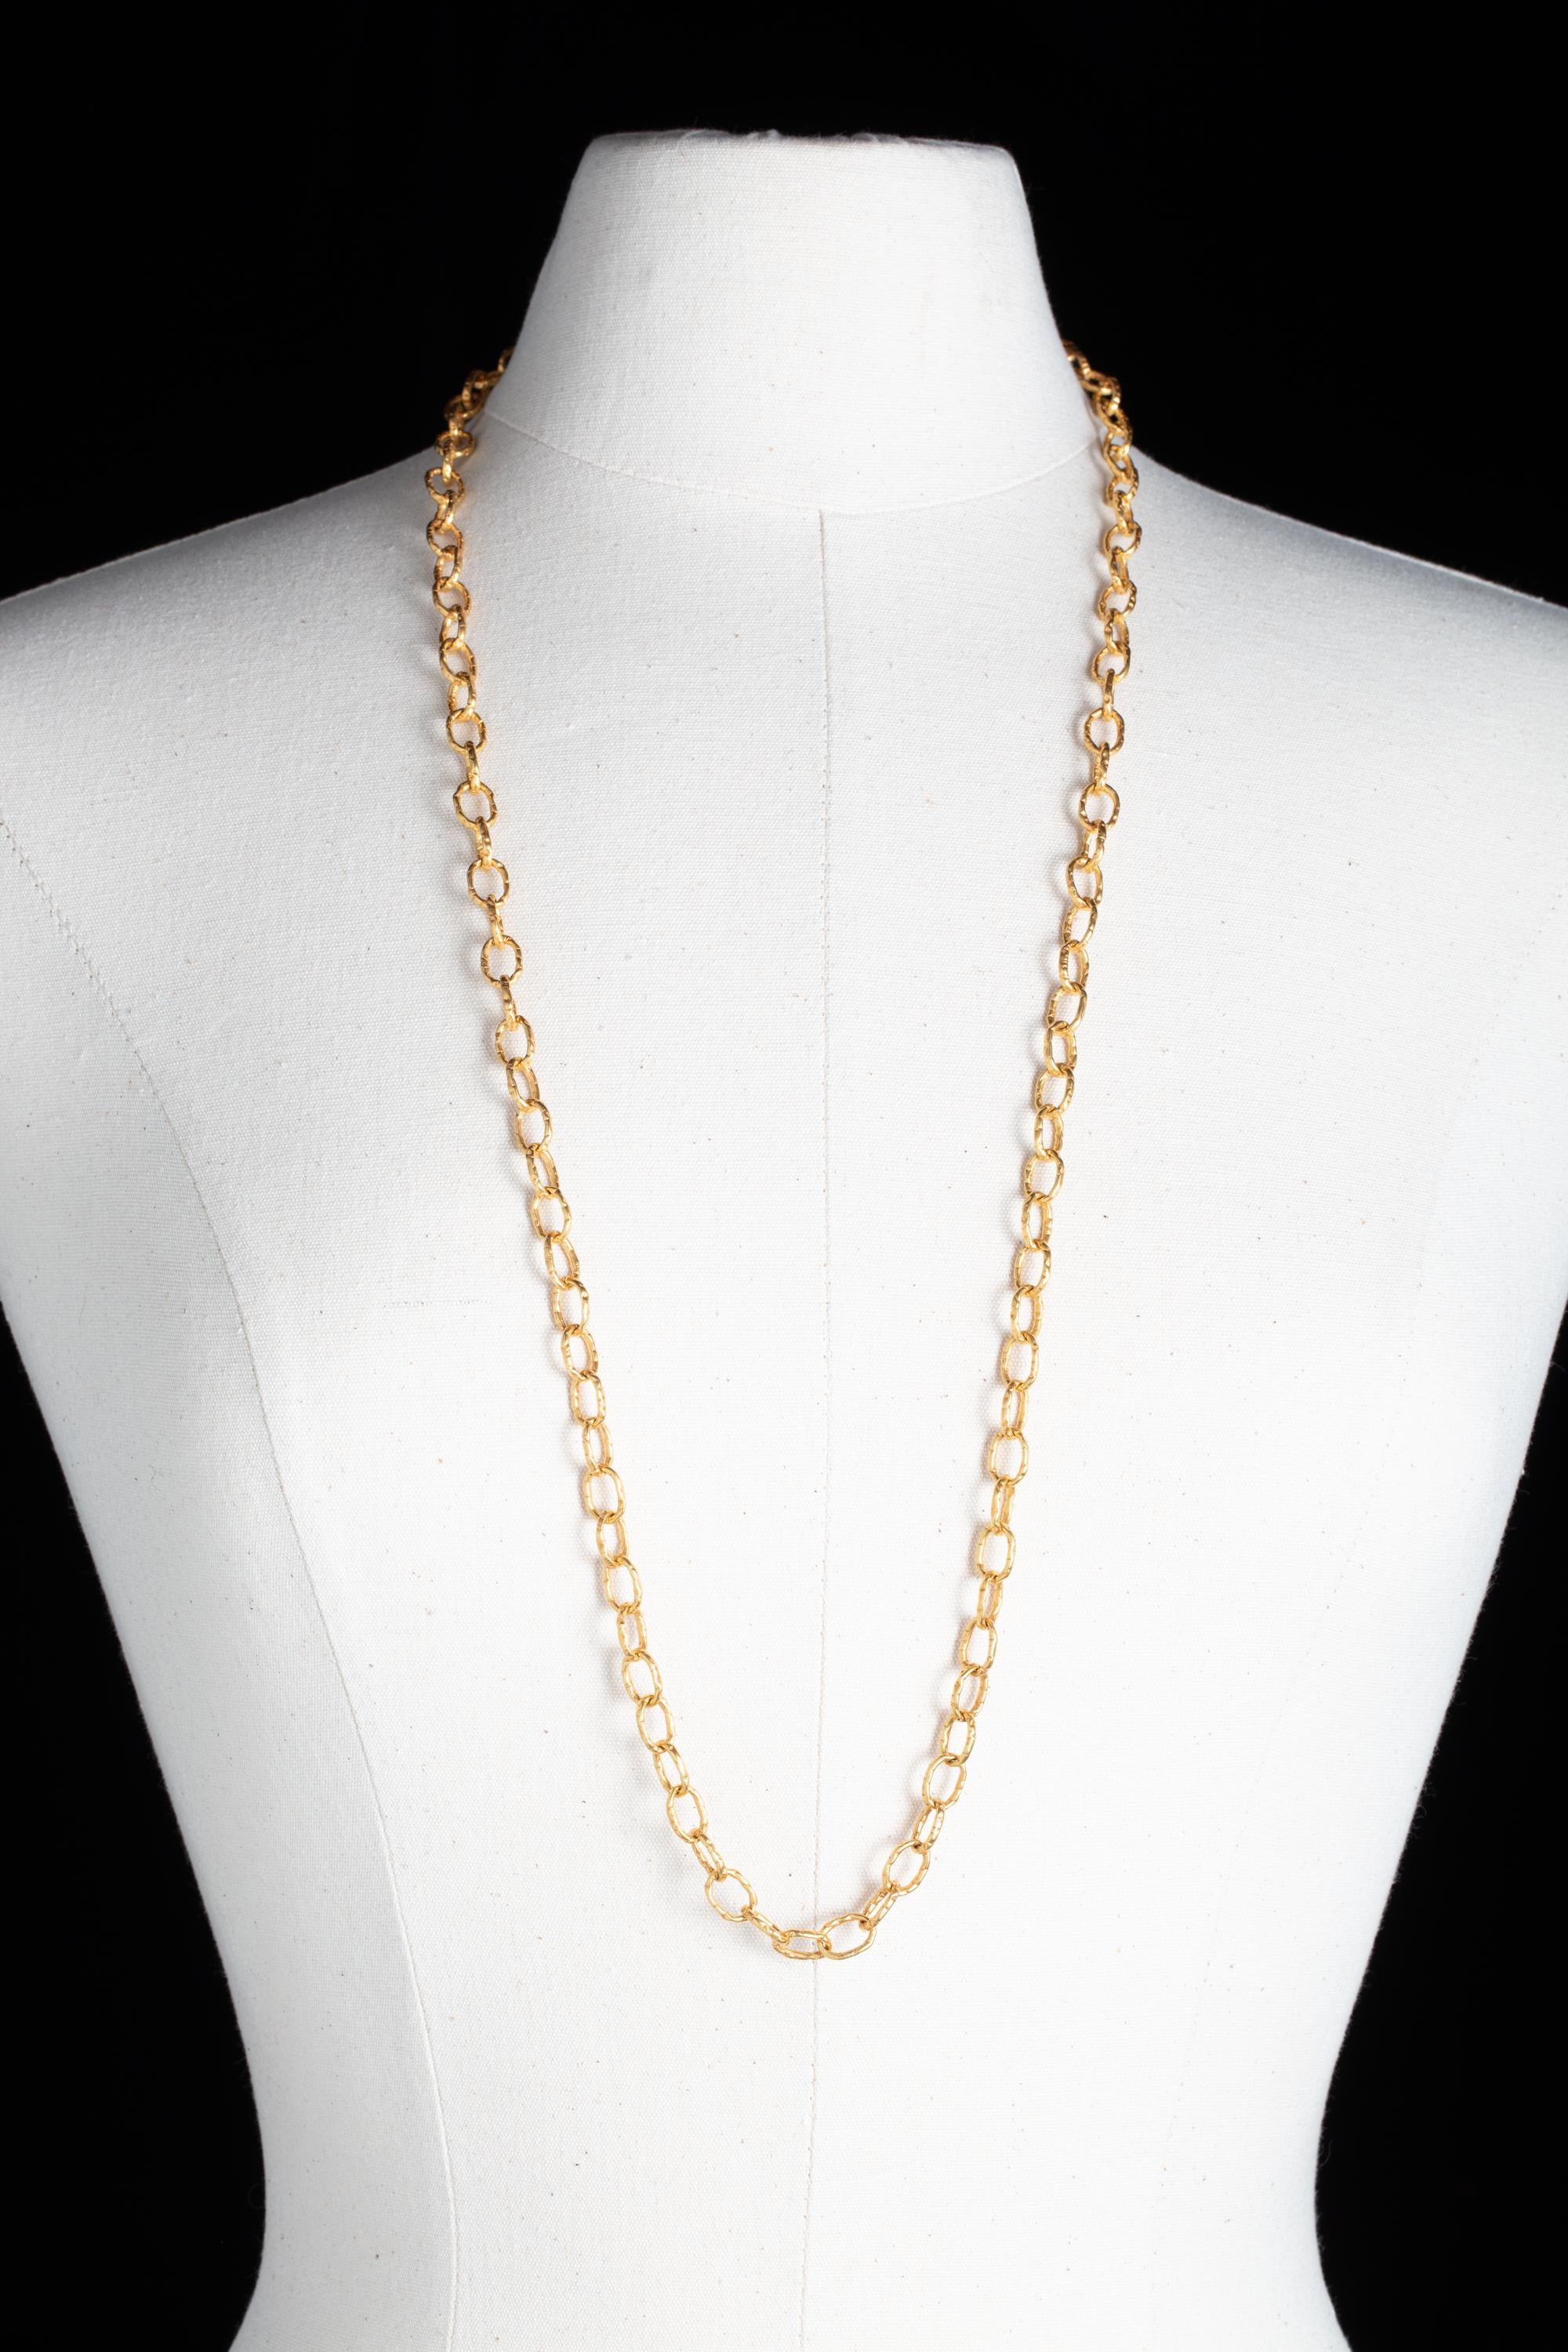 Hand-tooled 22K gold chain necklace.  Lovely textured chain long enough to double or wear long.  Double S-clasp blends in nicely.  Each link is 7/16'ths x 5/16'ths.